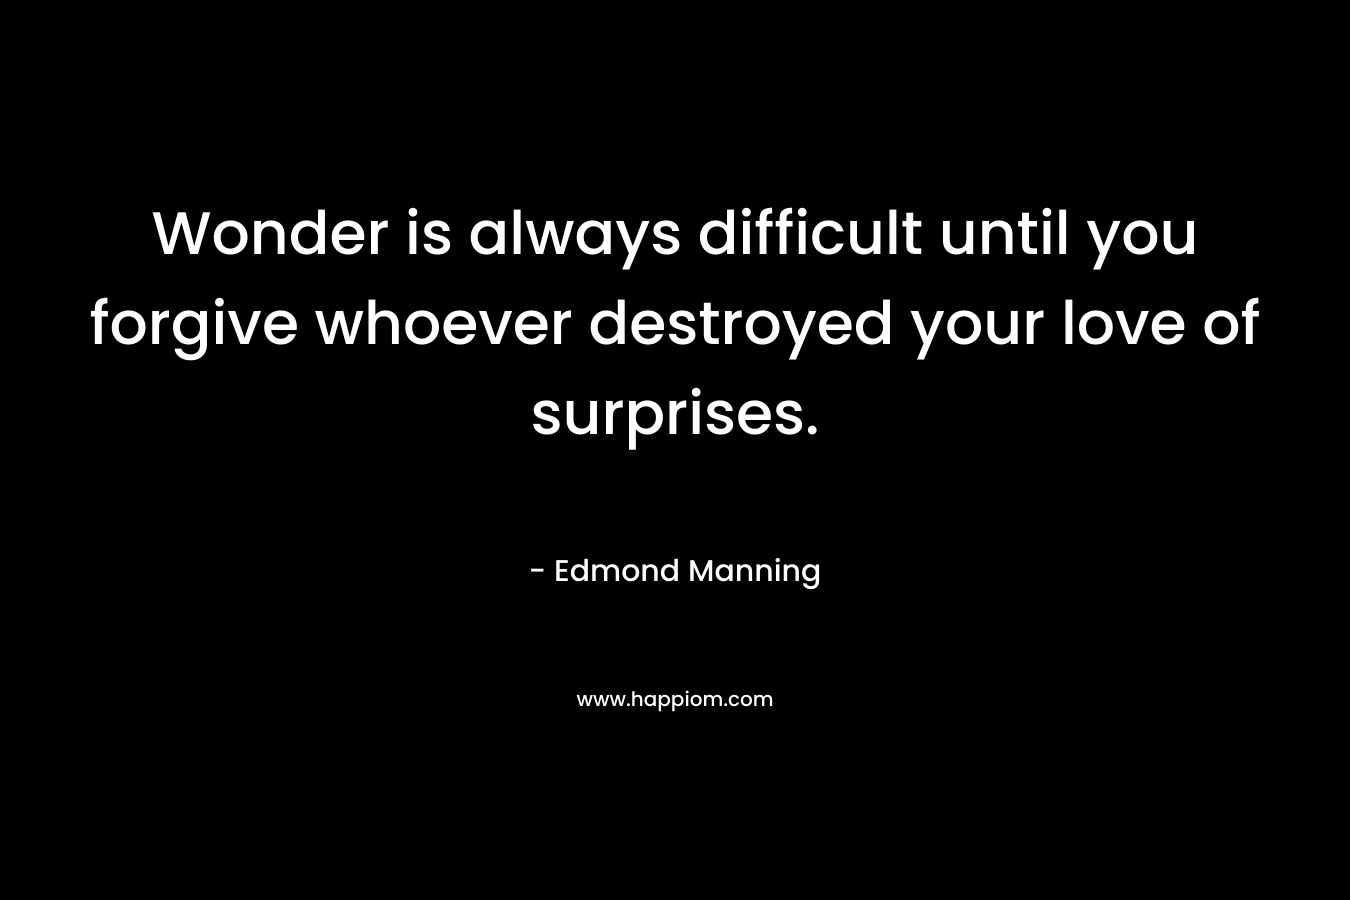 Wonder is always difficult until you forgive whoever destroyed your love of surprises. – Edmond Manning